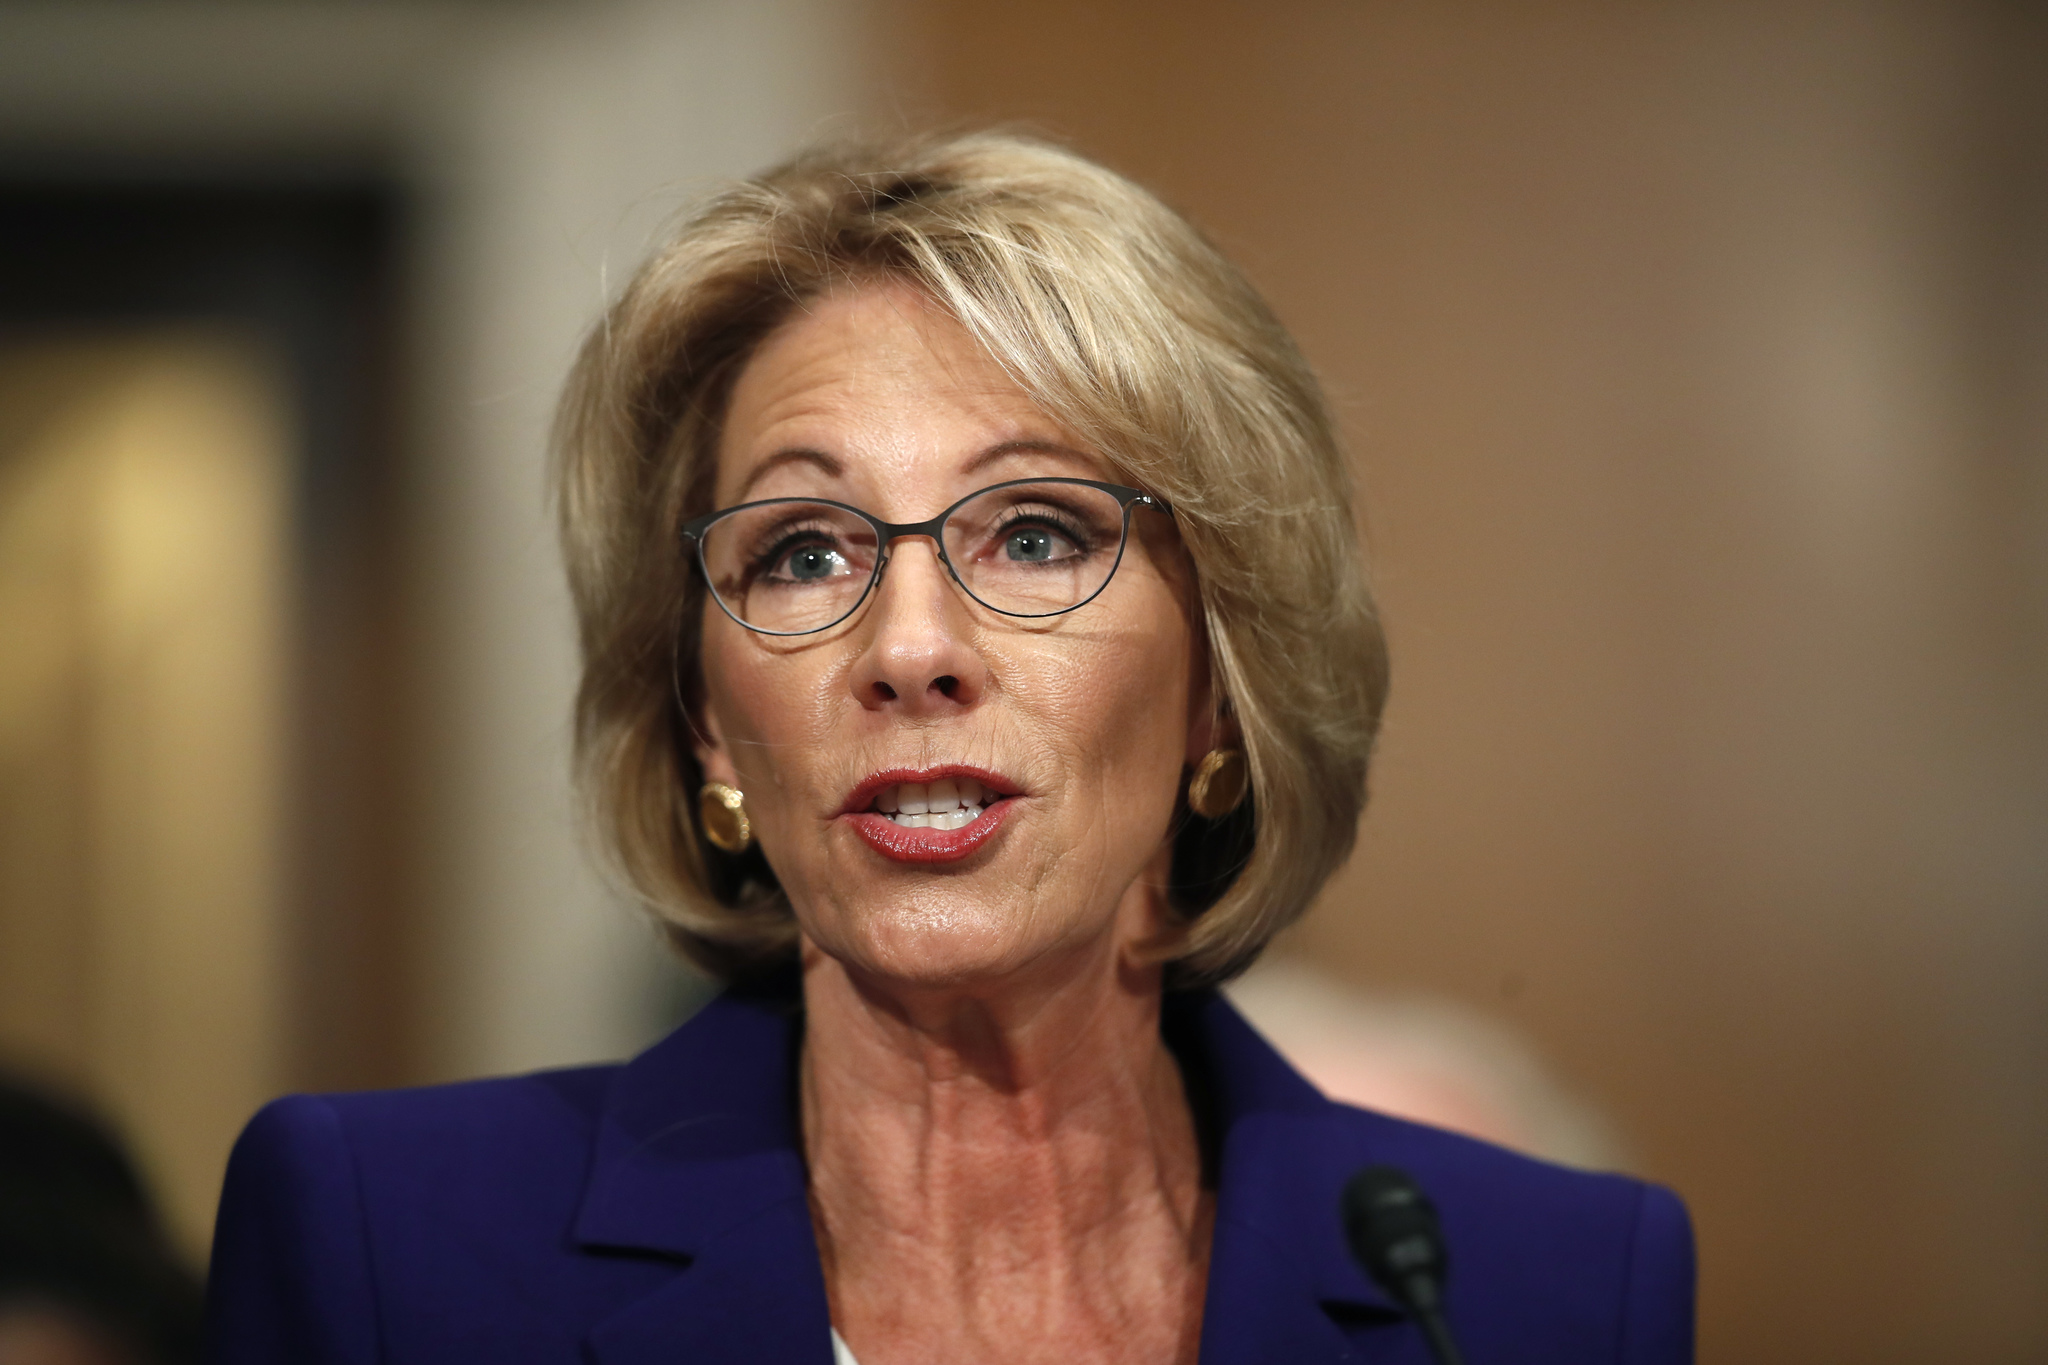 Education Secretary-designate Betsy DeVos testifies on Capitol Hill in Washington at her confirmation hearing Tuesday before the Senate Health, Education, Labor and Pensions Committee. Carolyn Kaster | The Associated Press